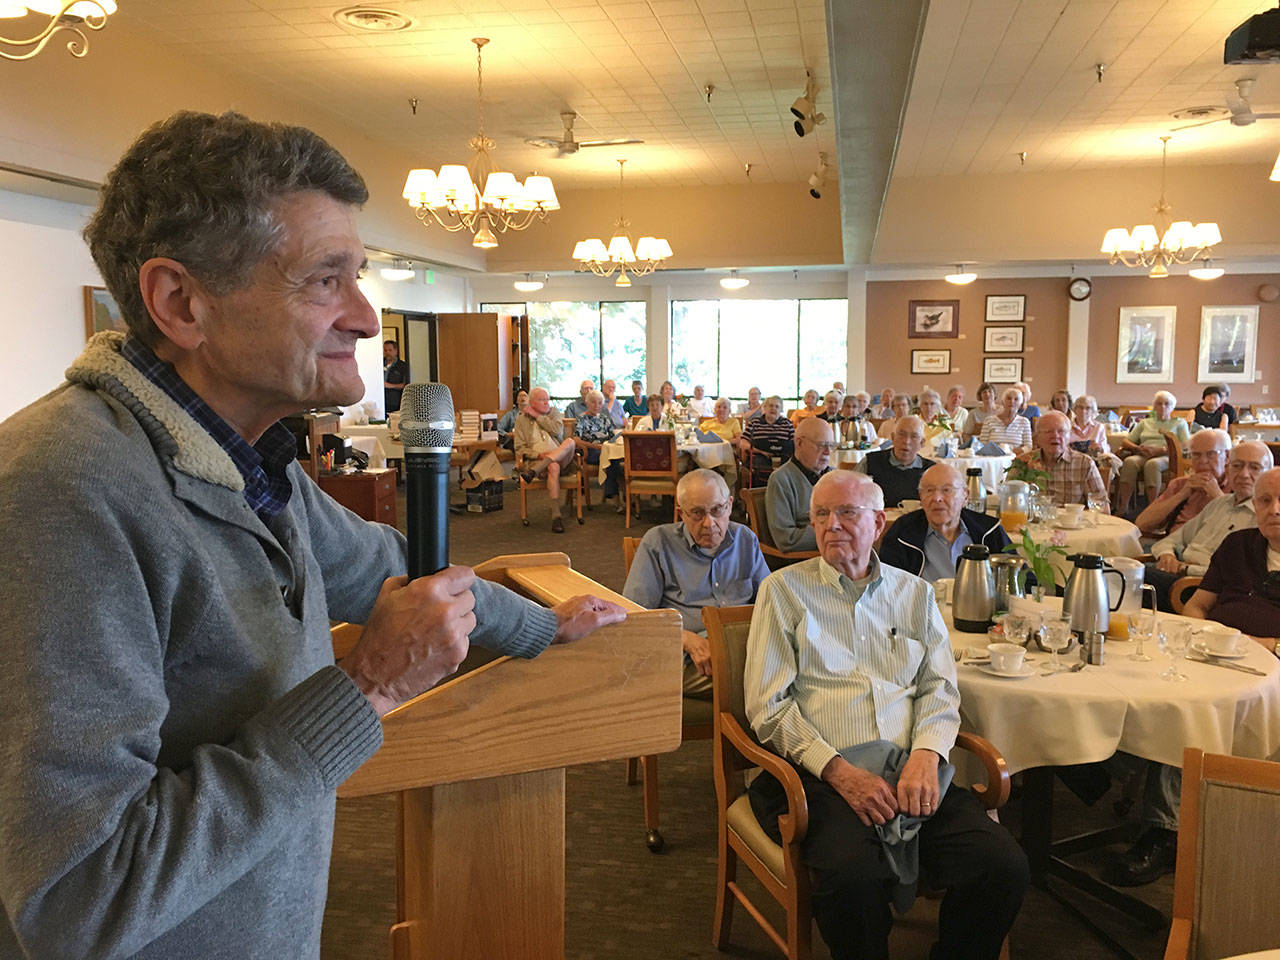 Michael Medved, syndicated talk show host and film critic, speaks at Covenant Shores on July 11. Contributed photo